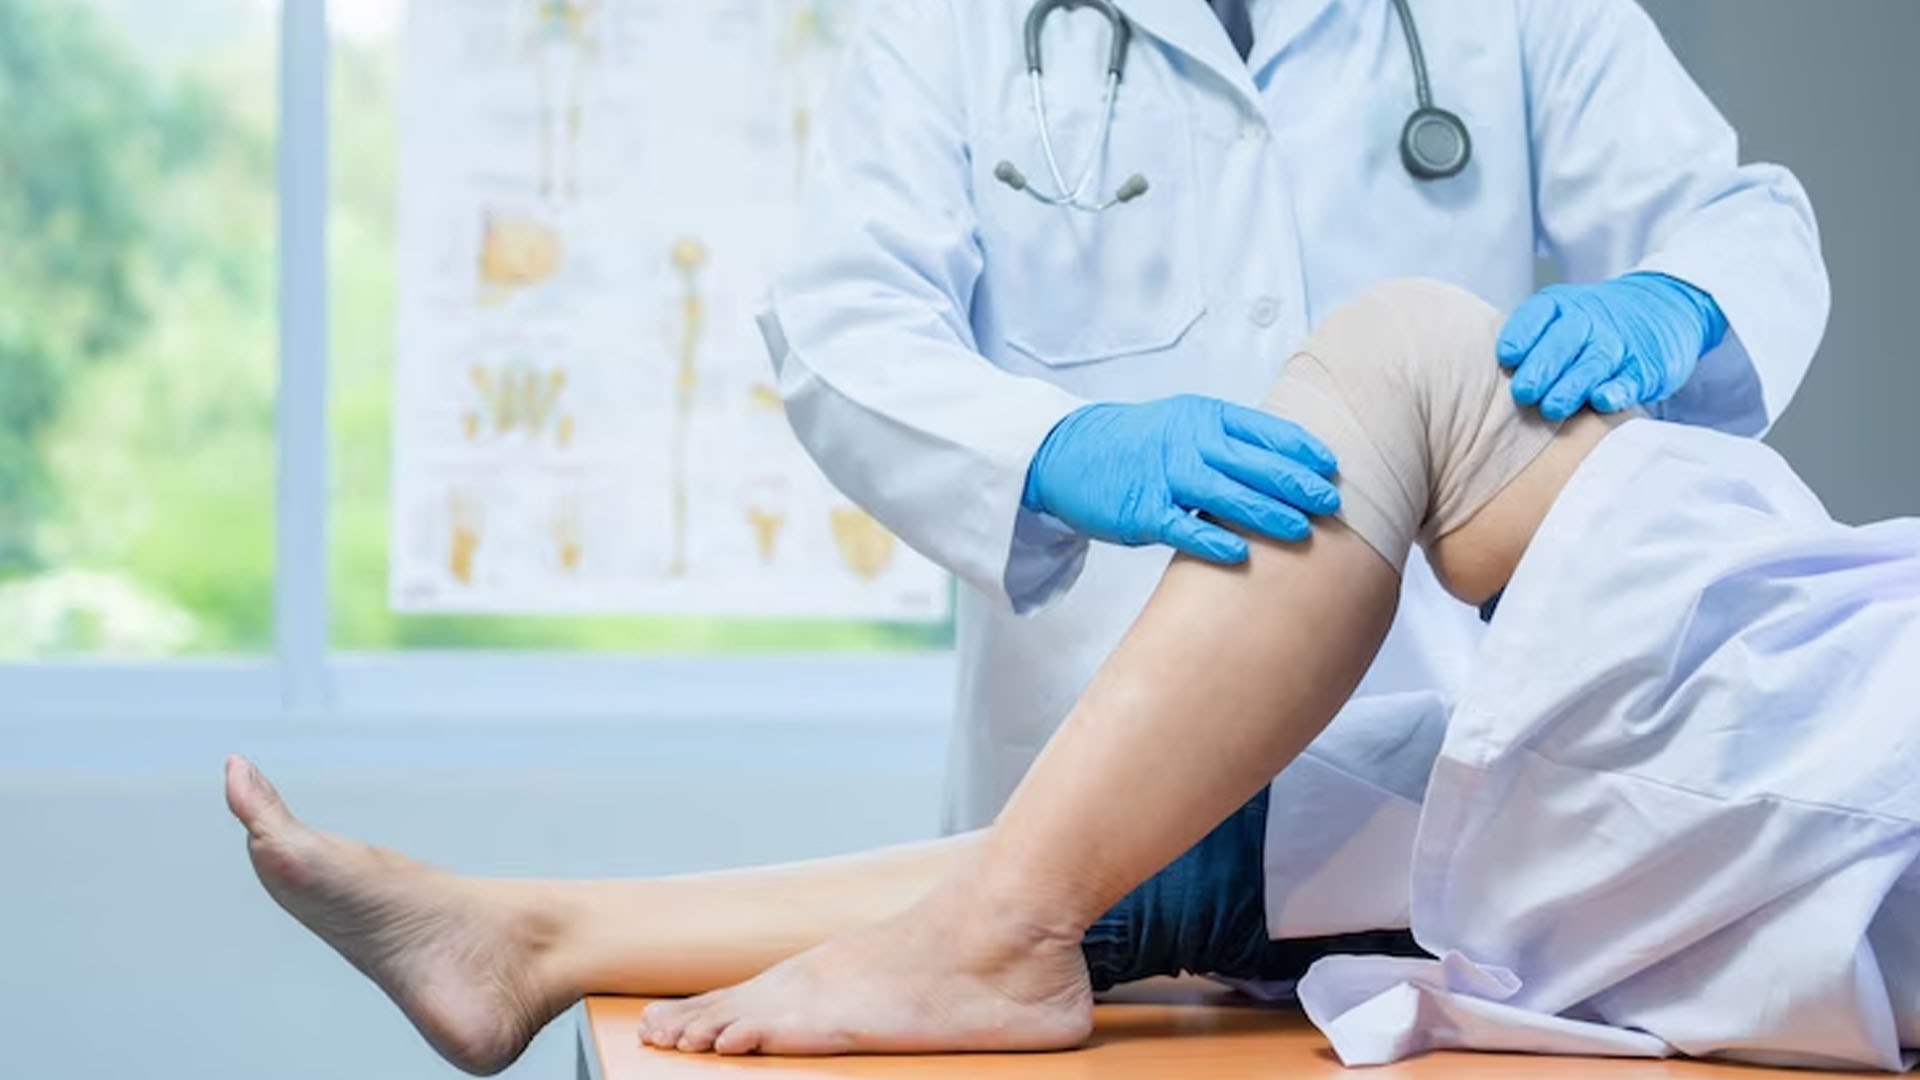 What are the Symptoms of Leg Swelling?